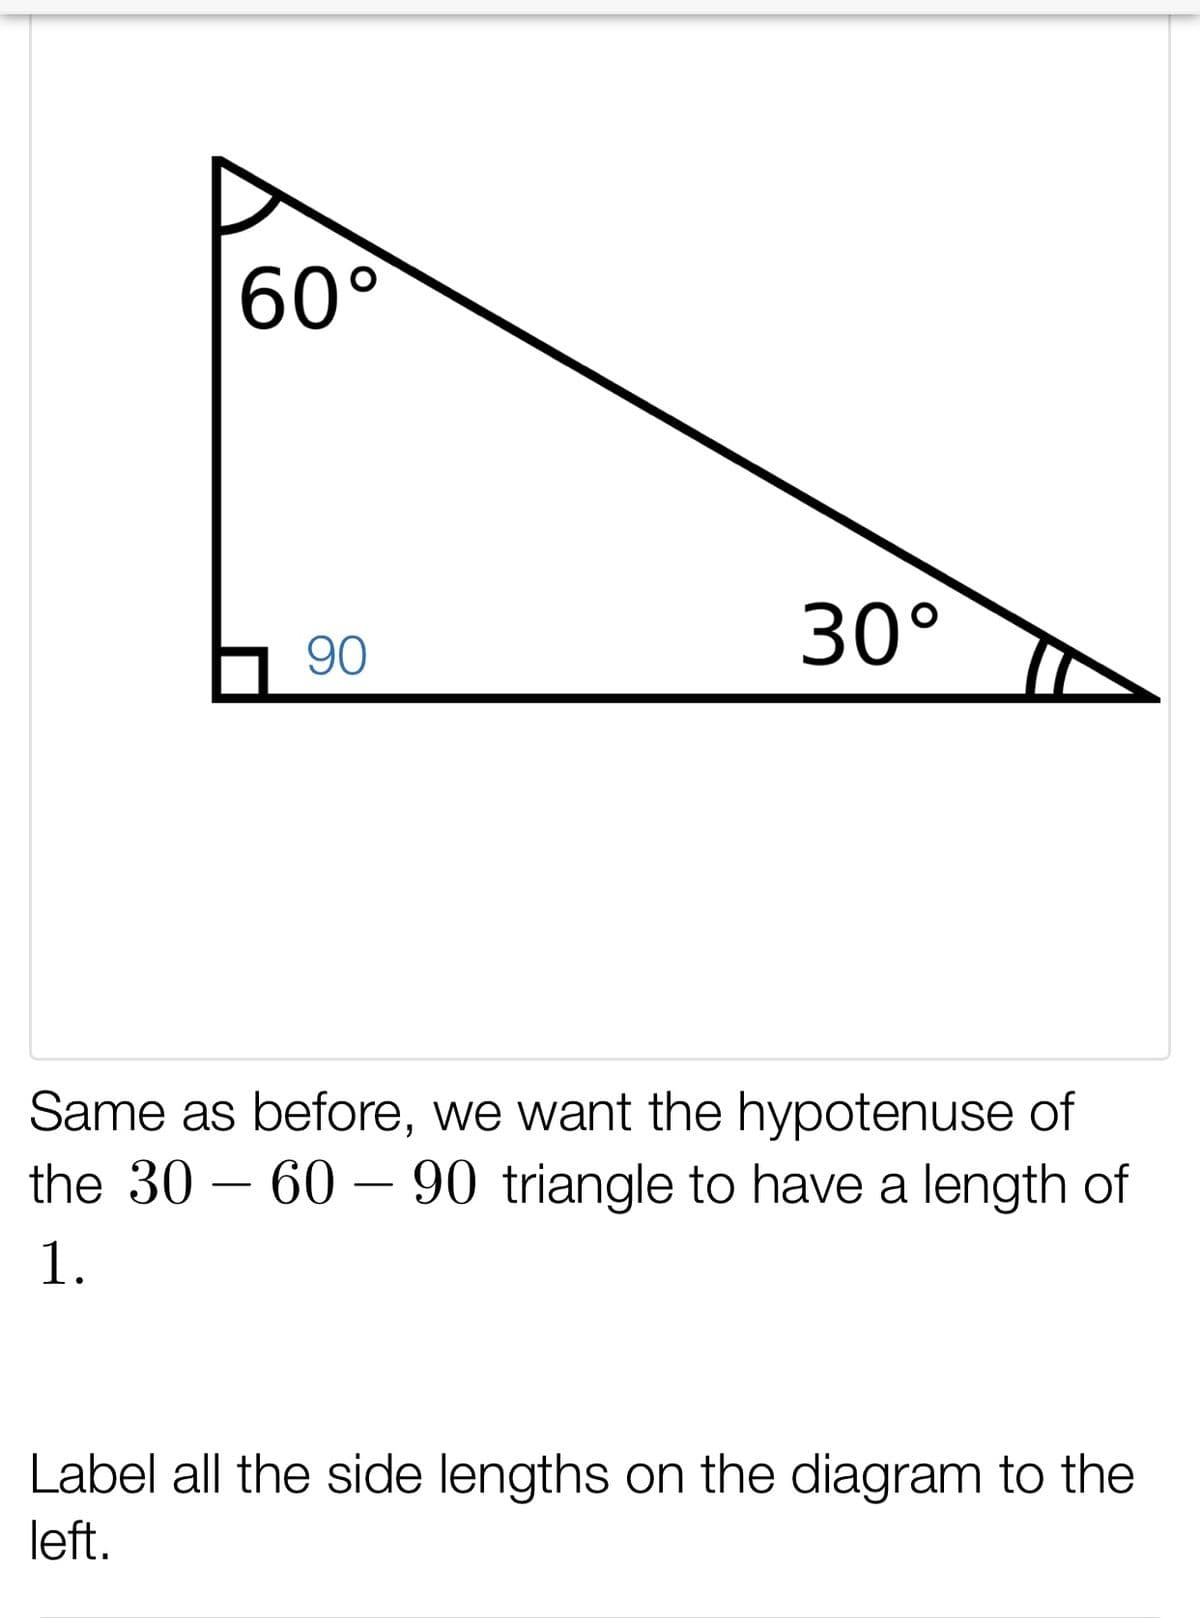 60°
30°
90
Same as before, we want the hypotenuse of
the 30 – 60 – 90 triangle to have a length of
-
1.
Label all the side lengths on the diagram to the
left.
